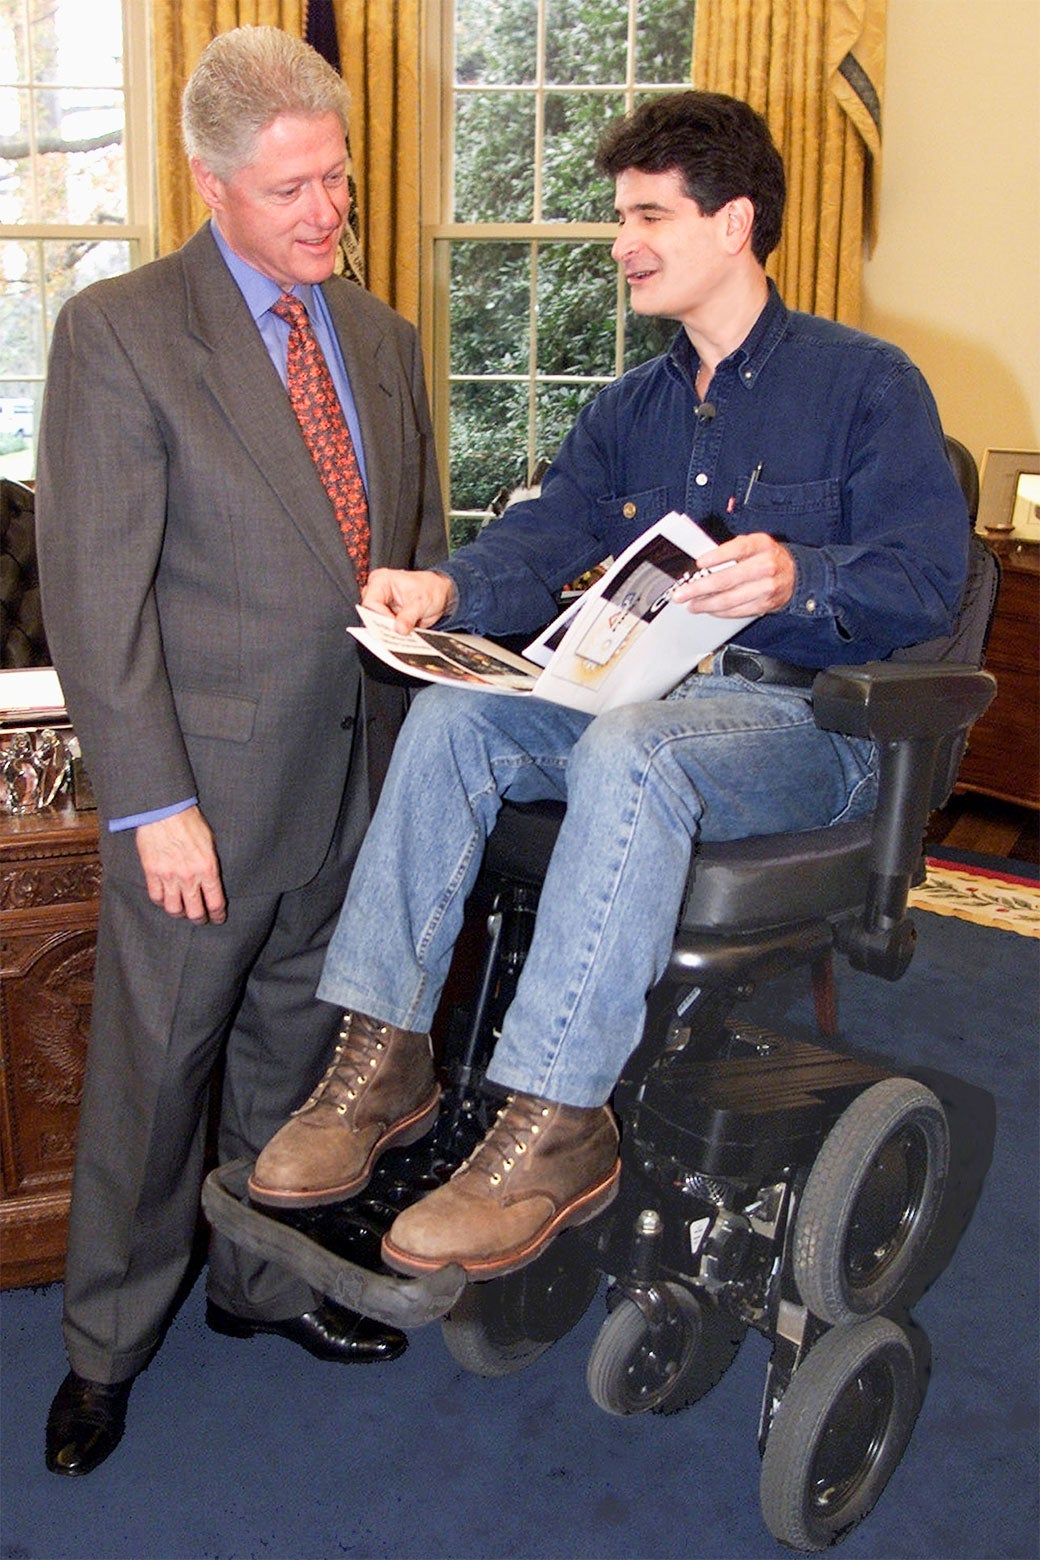 Dean Kamen sits in an iBot wheelchair in the Oval Office while showing a binder to Bill Clinton.